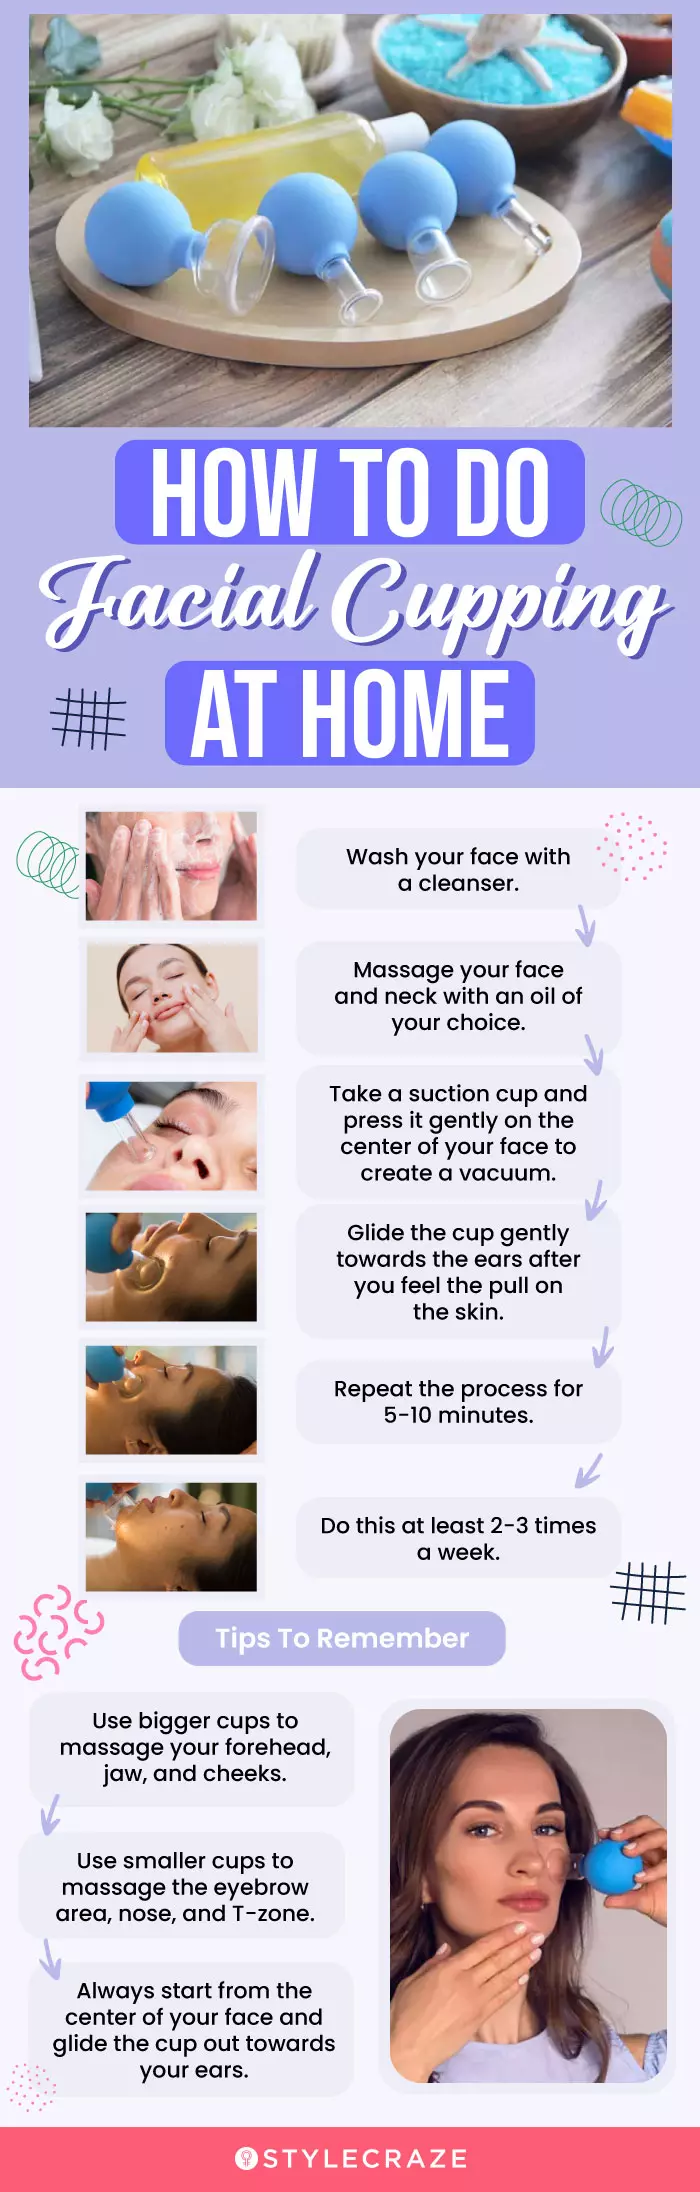 how to do facial cupping at home (infographic)